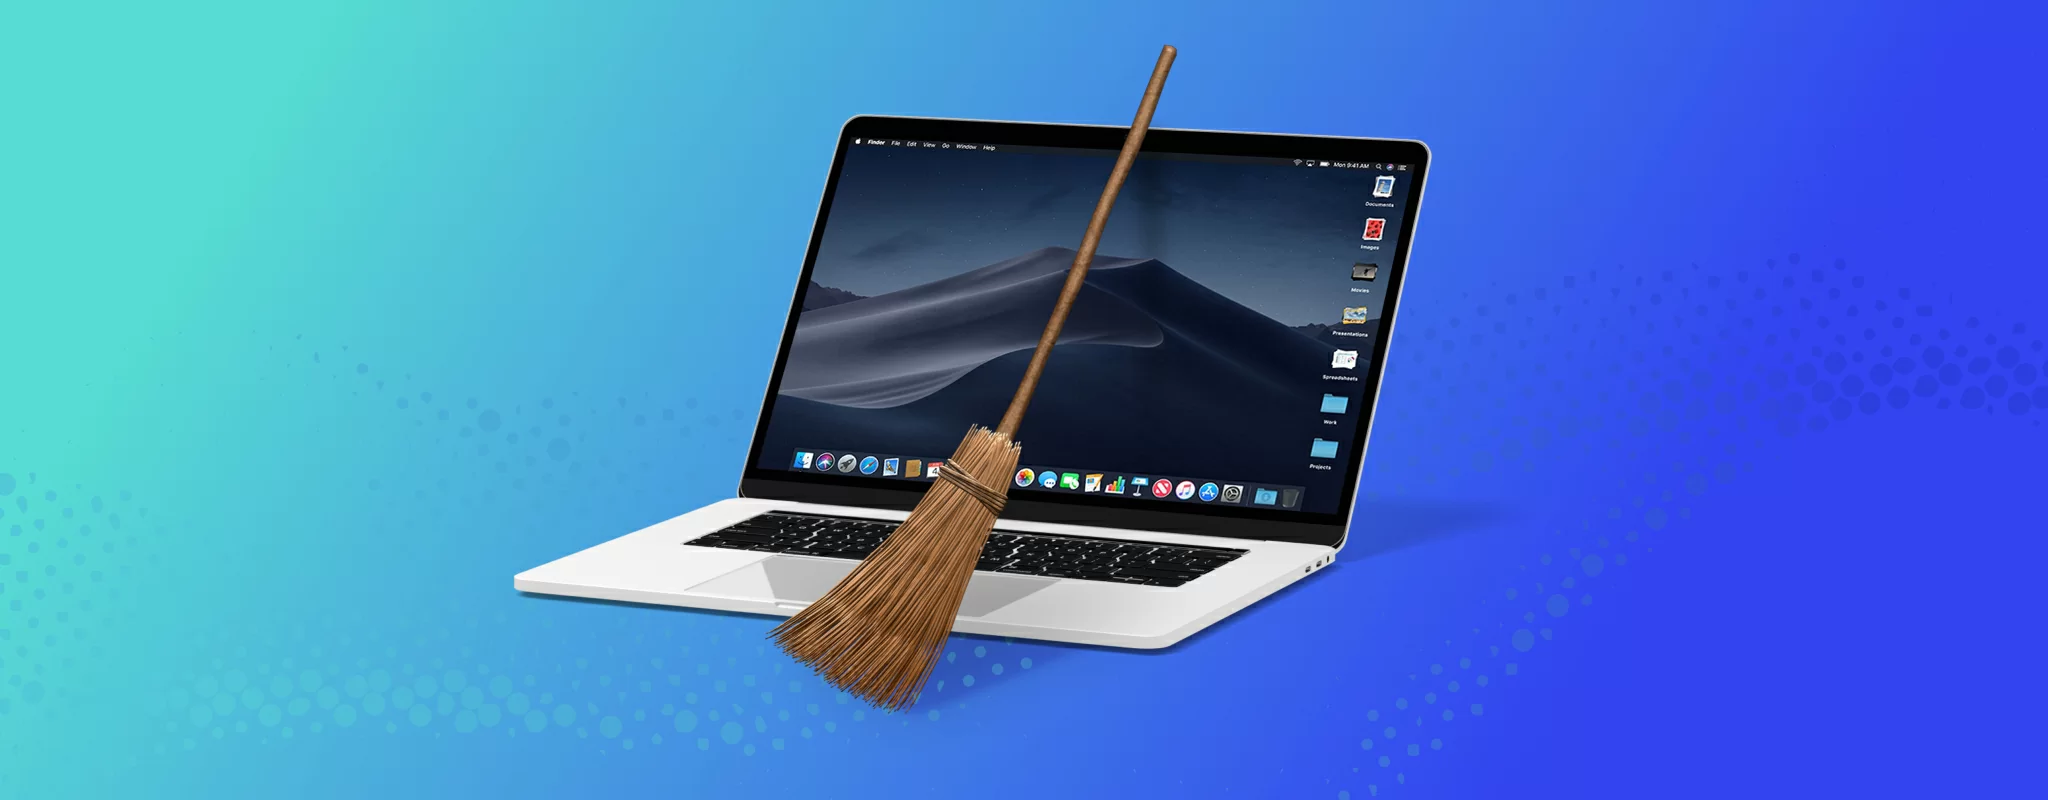 Best PC Cleaner Software